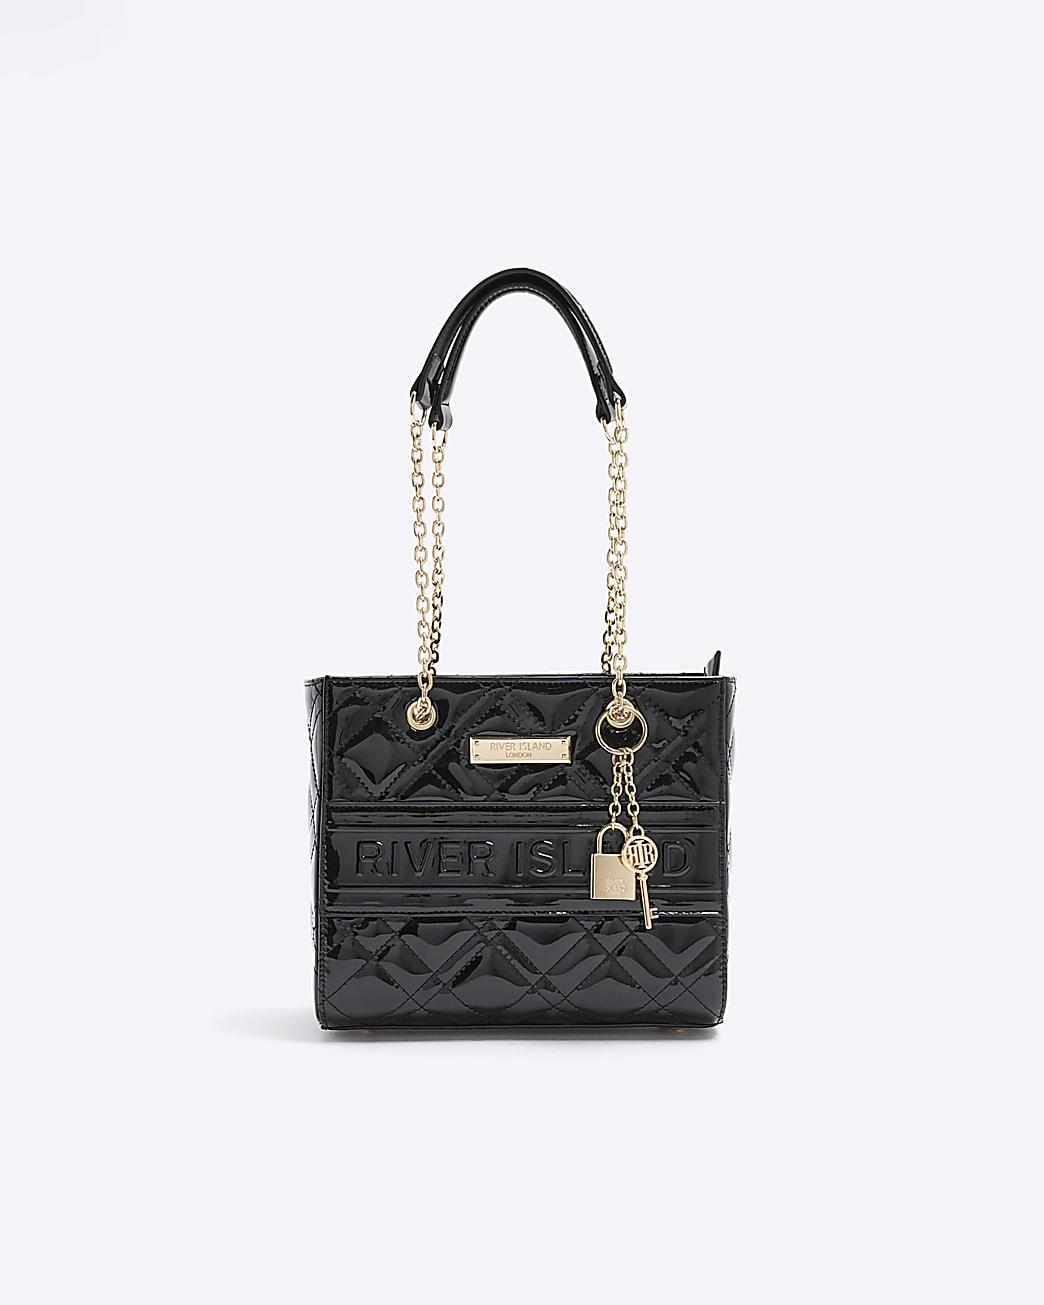 River Island patent embossed chain tote bag in black